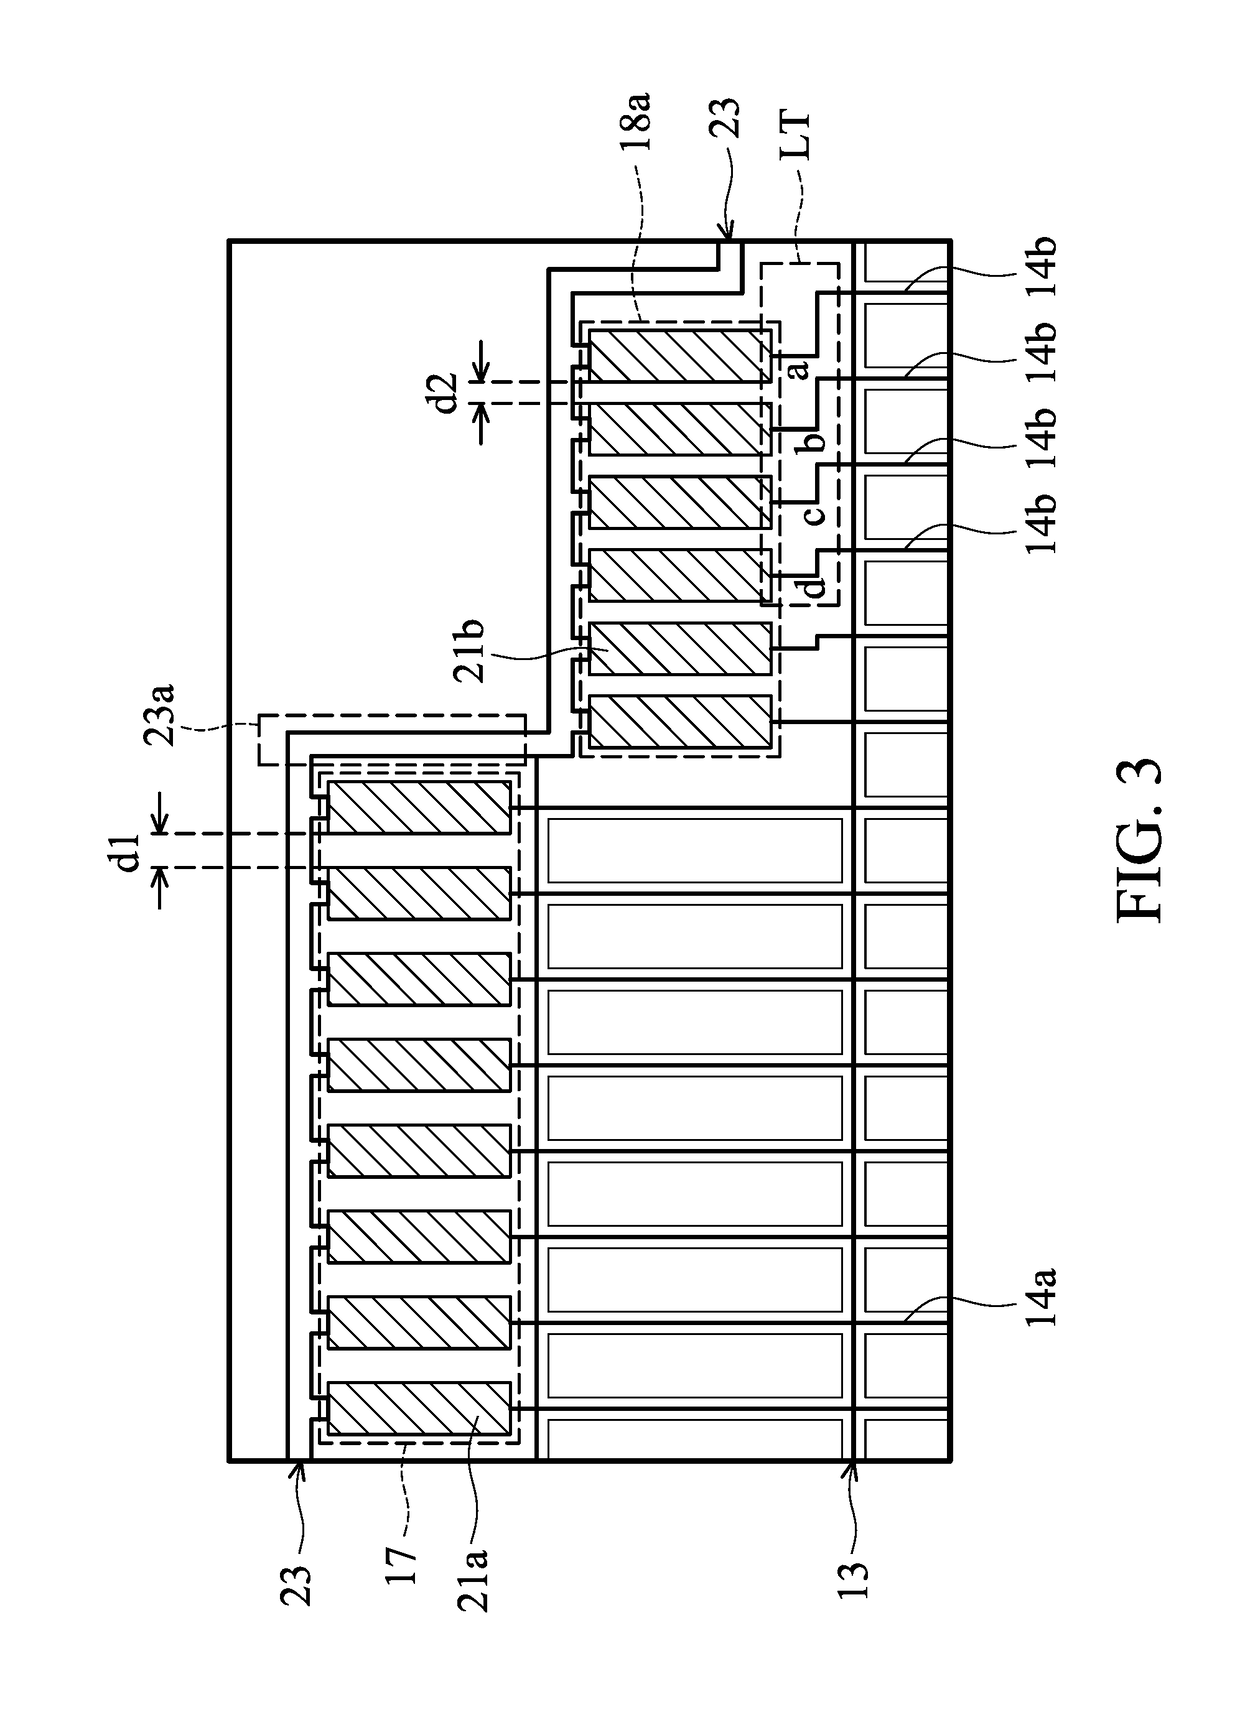 Display device with different circuit groups